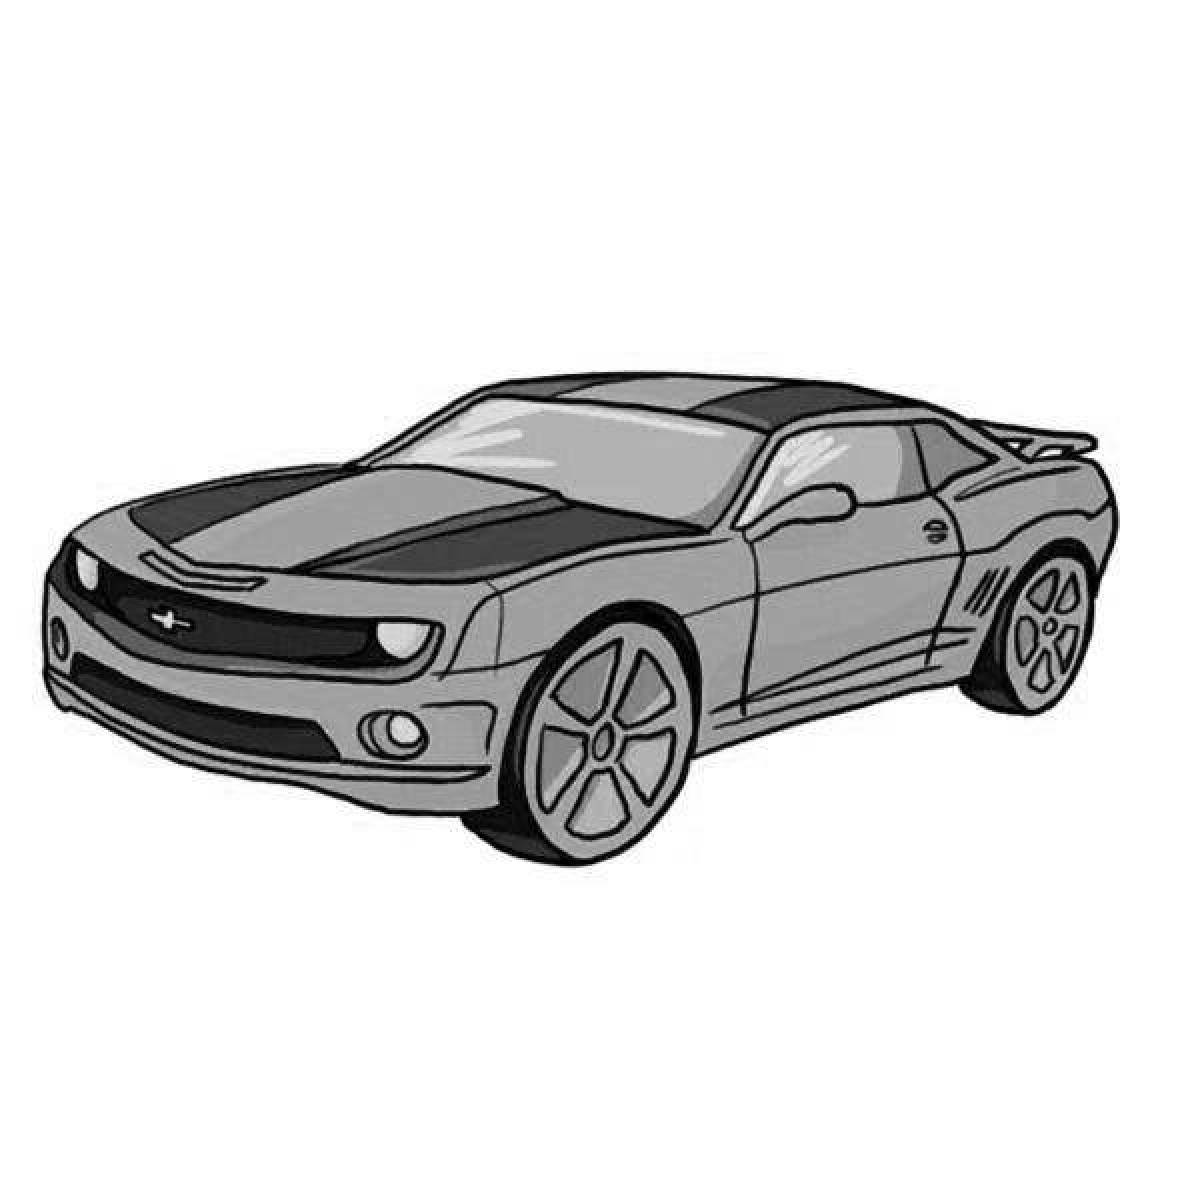 Coloring page charming bumblebee car